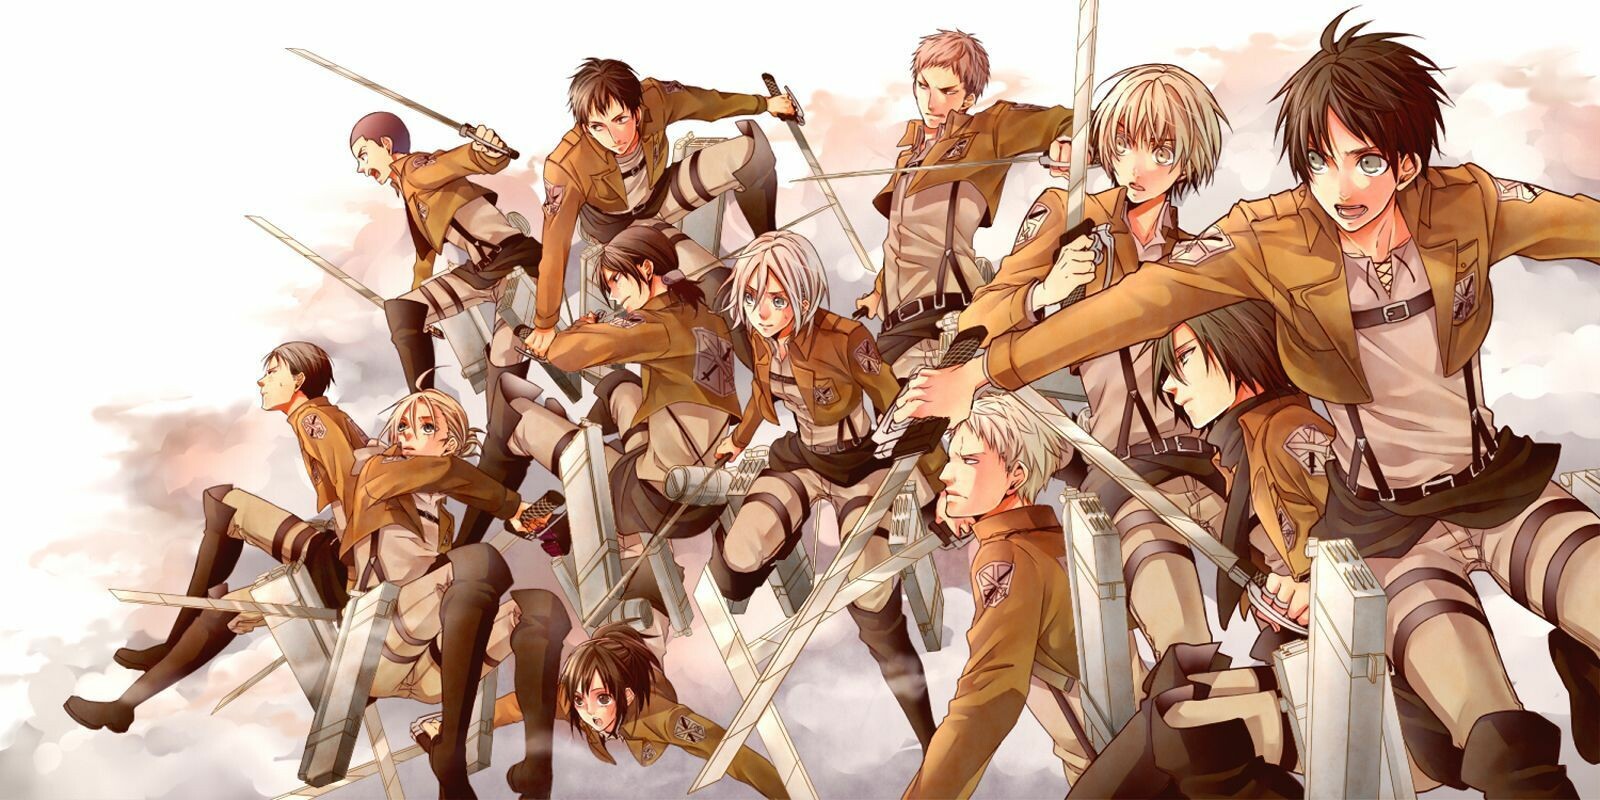 Attack on Titan Wallpapers  Top 65 Best Attack on Titan Backgrounds  Download